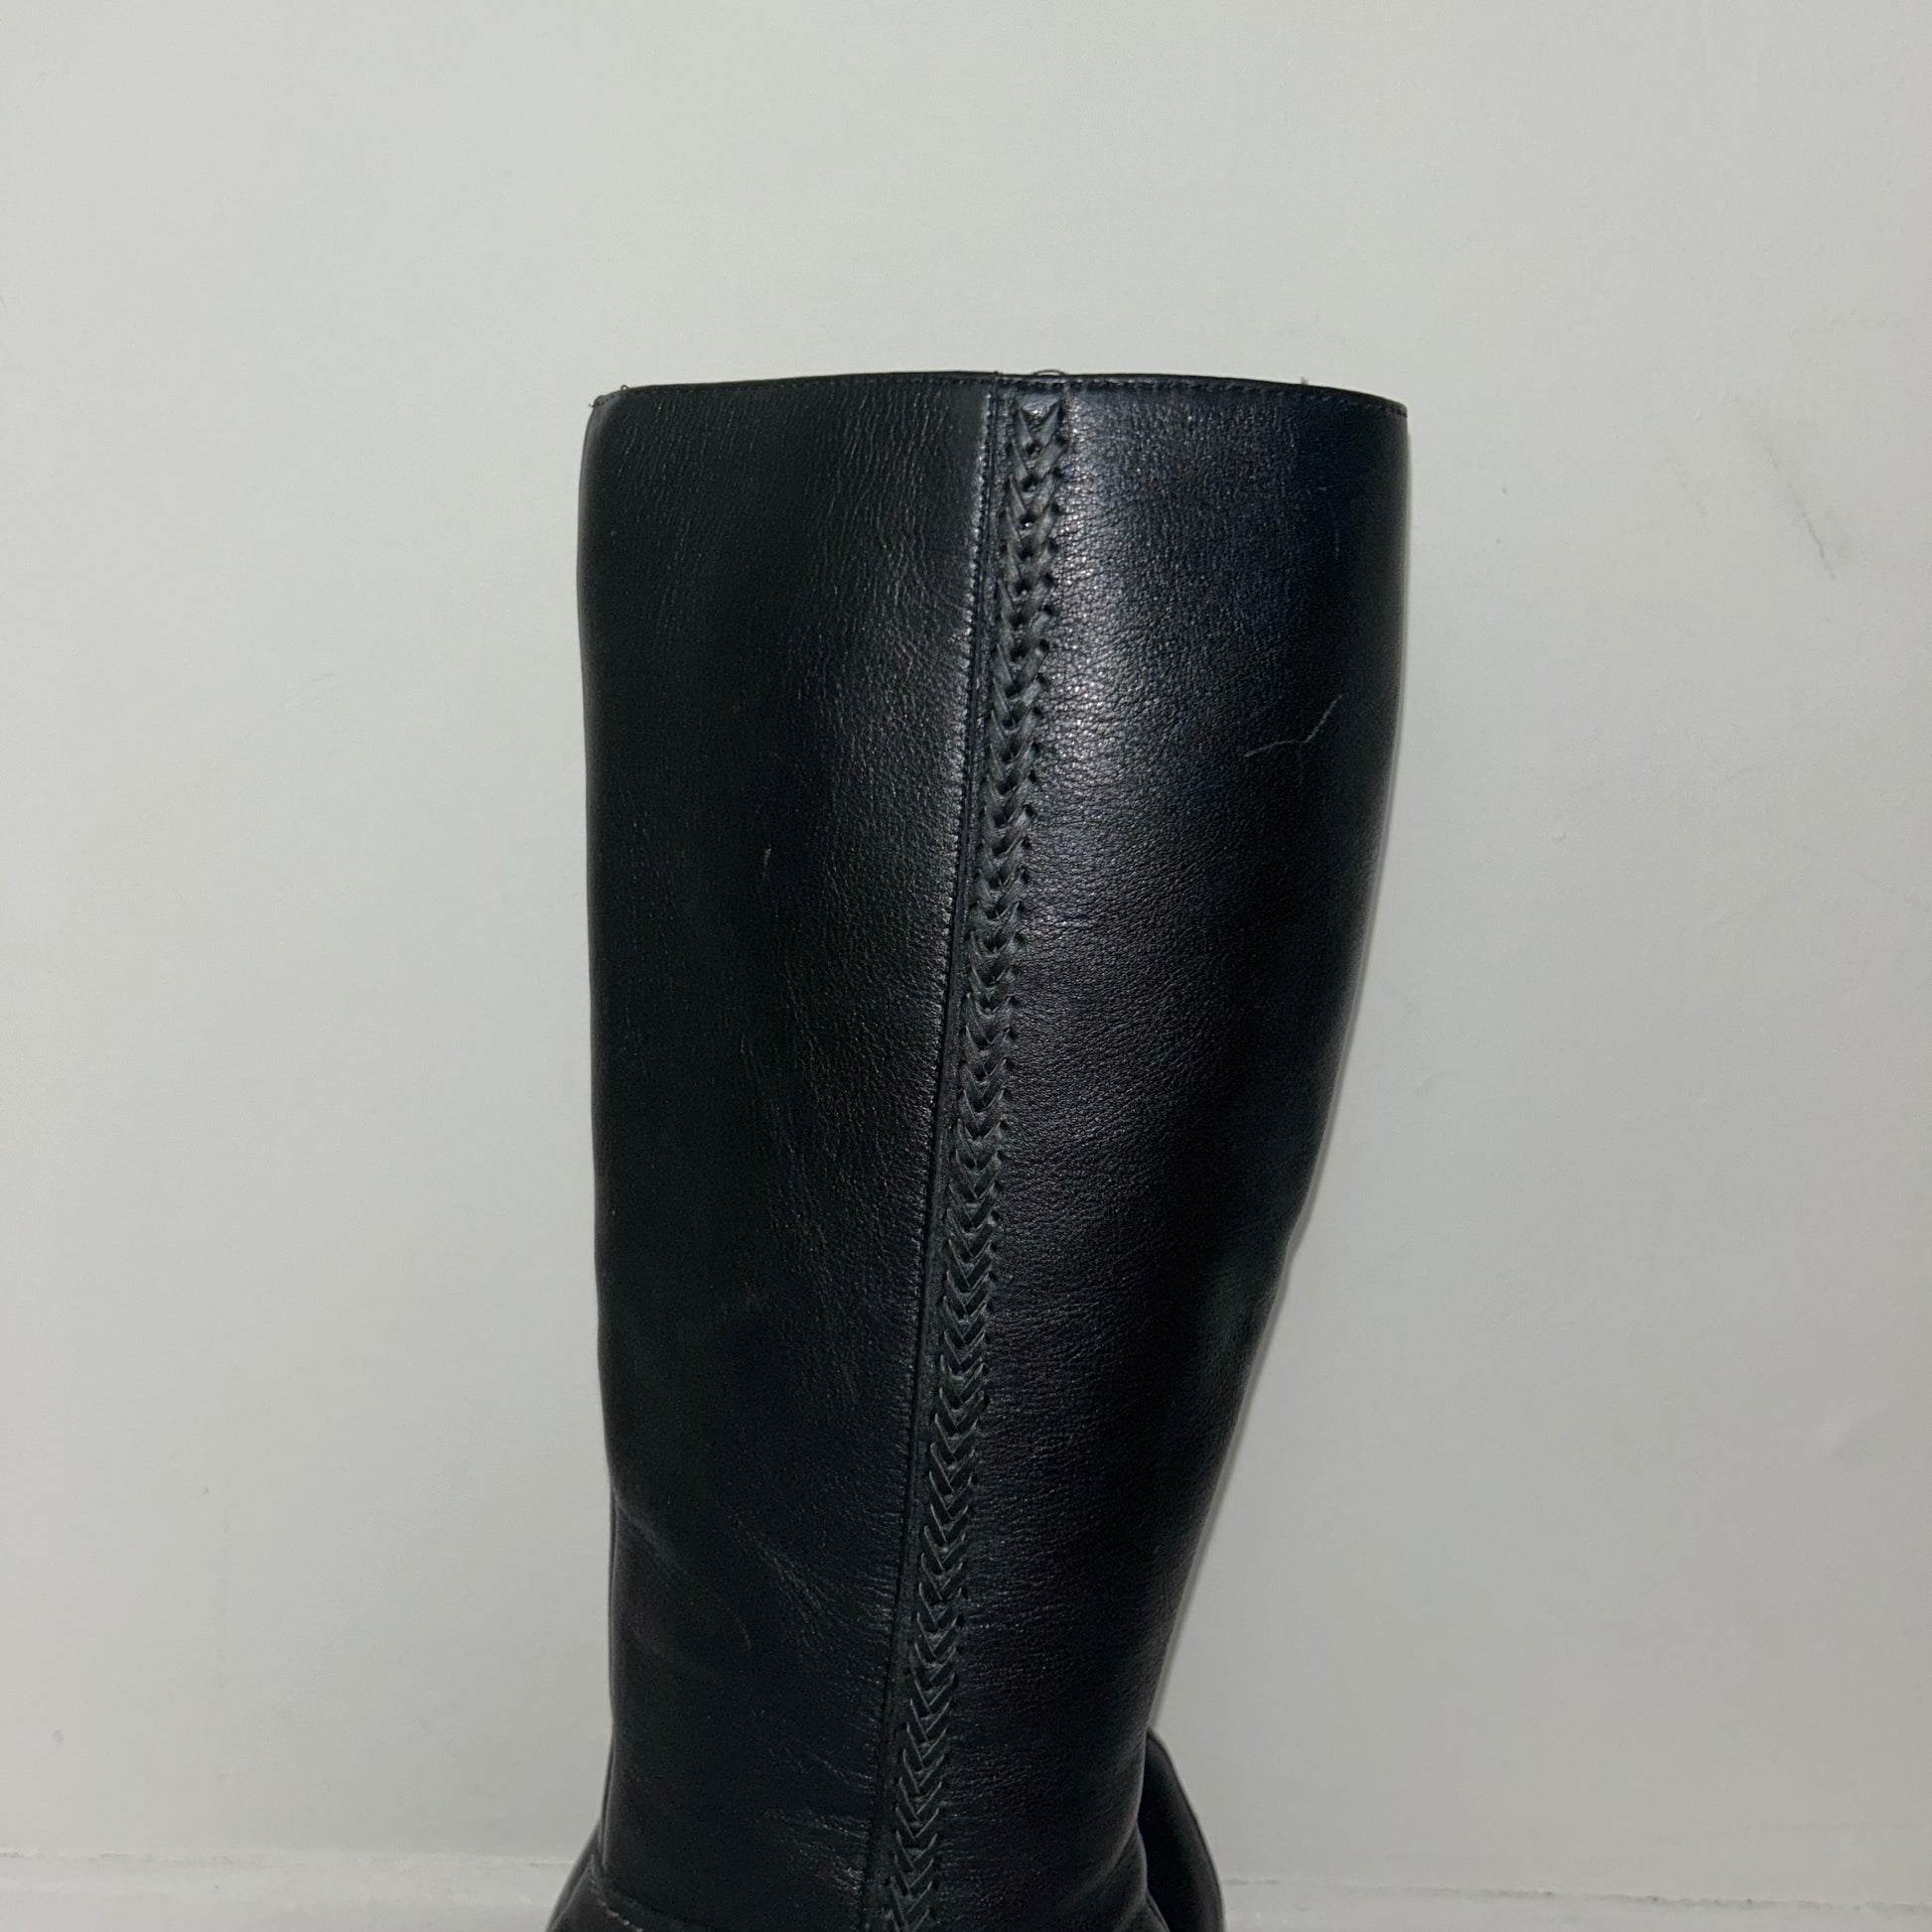 close up of black knee high real leather boots shown on a white background